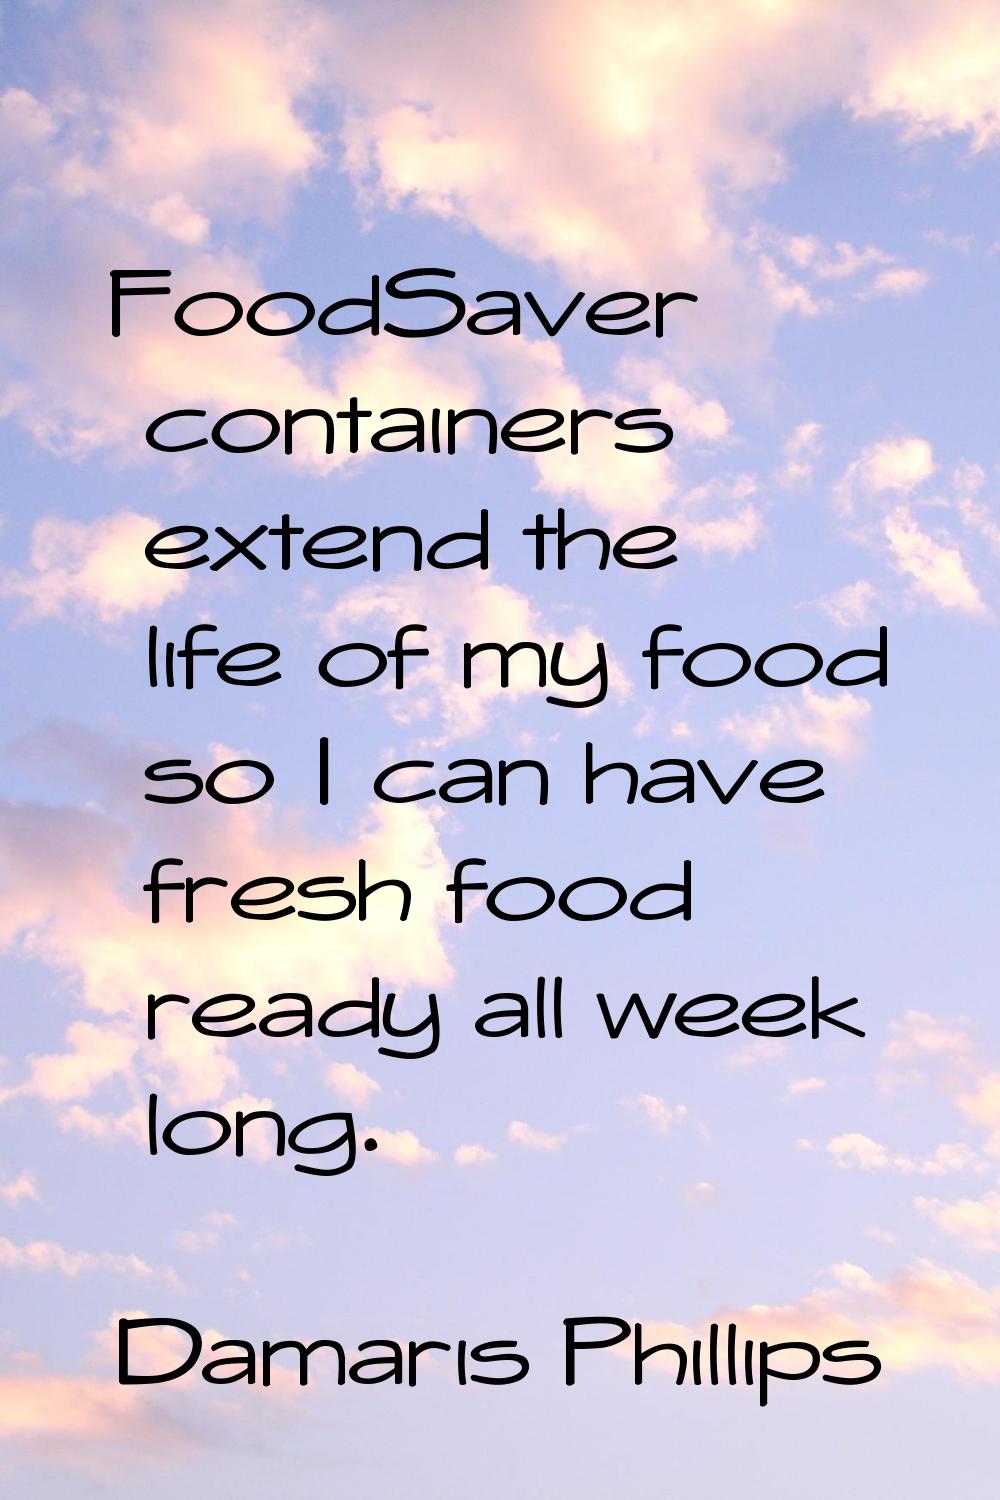 FoodSaver containers extend the life of my food so I can have fresh food ready all week long.